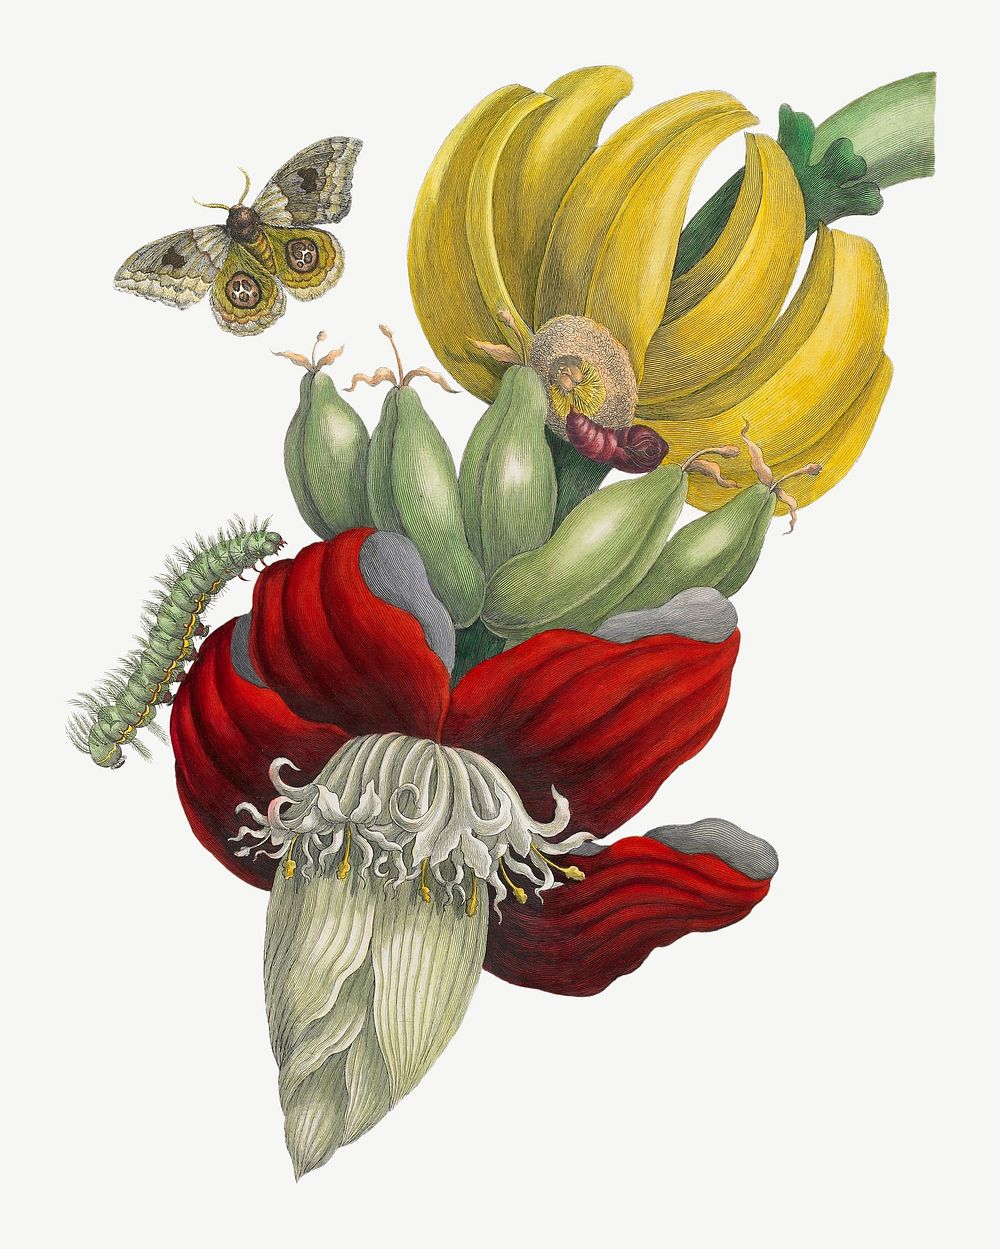 Inflorescence of Banana, vintage flower illustration after Maria Sibylla Merian psd. Remixed by rawpixel.